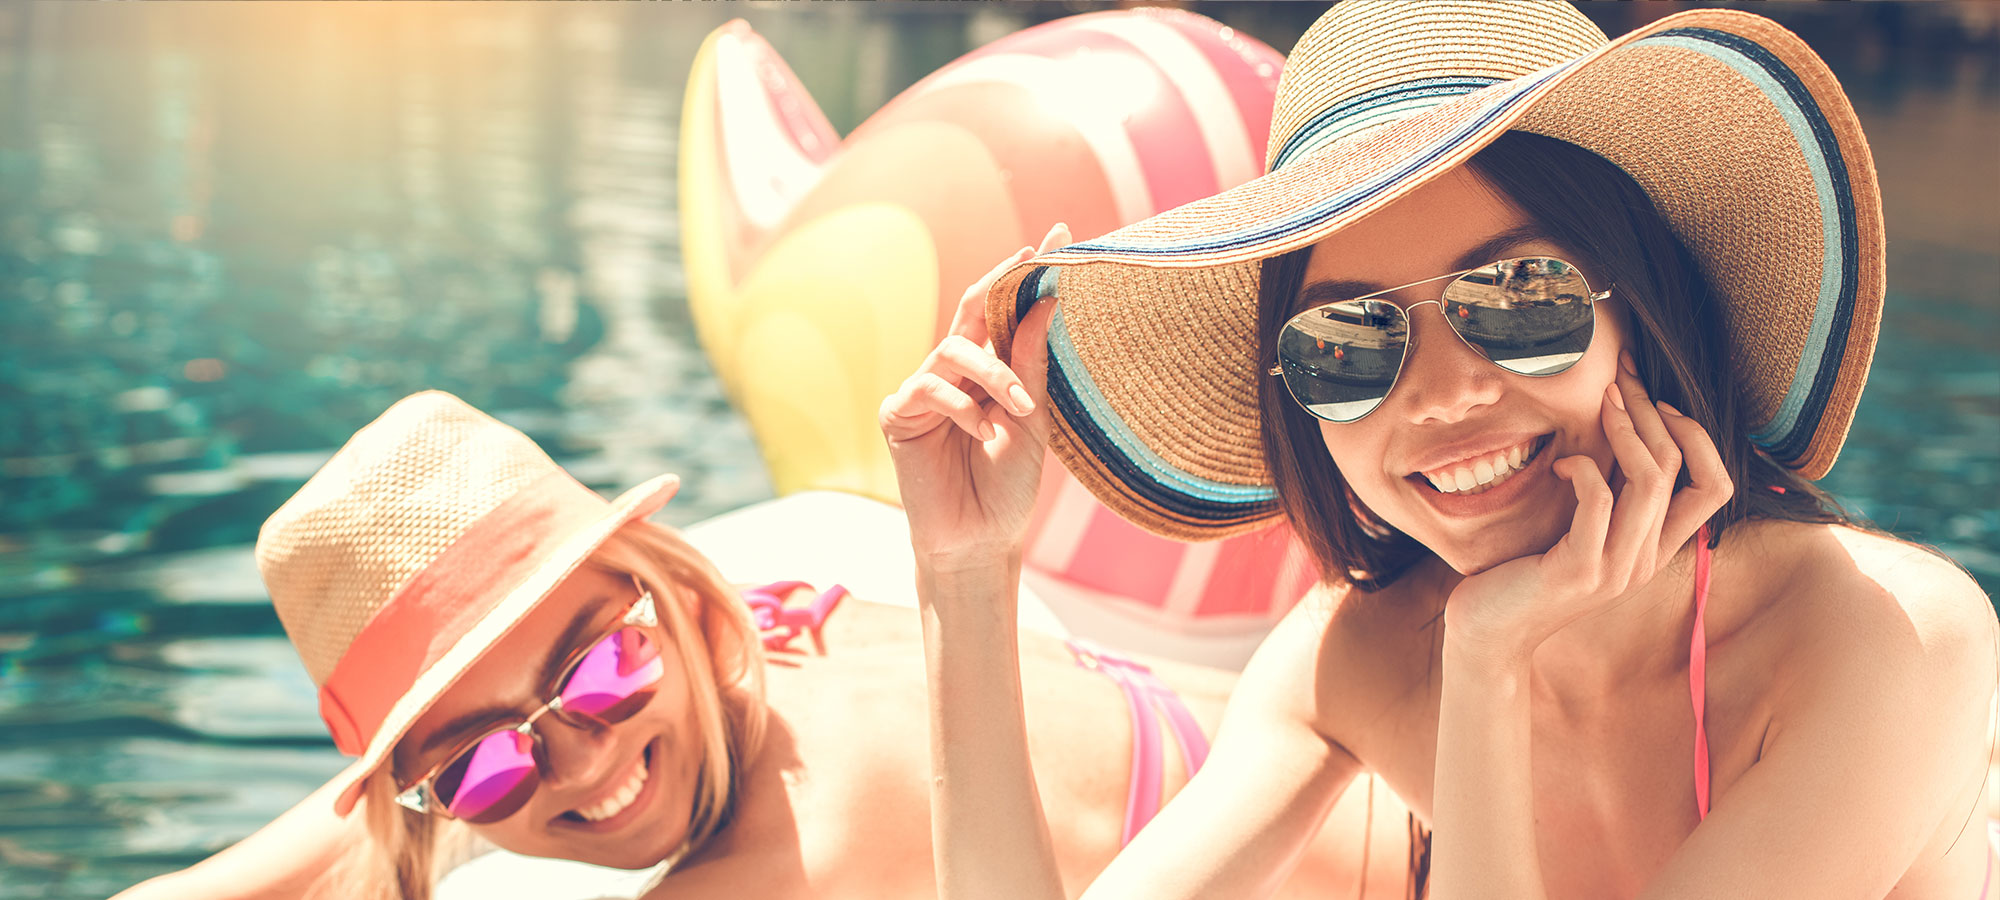 Two women wearing shades and straw hat smiling by the poolside